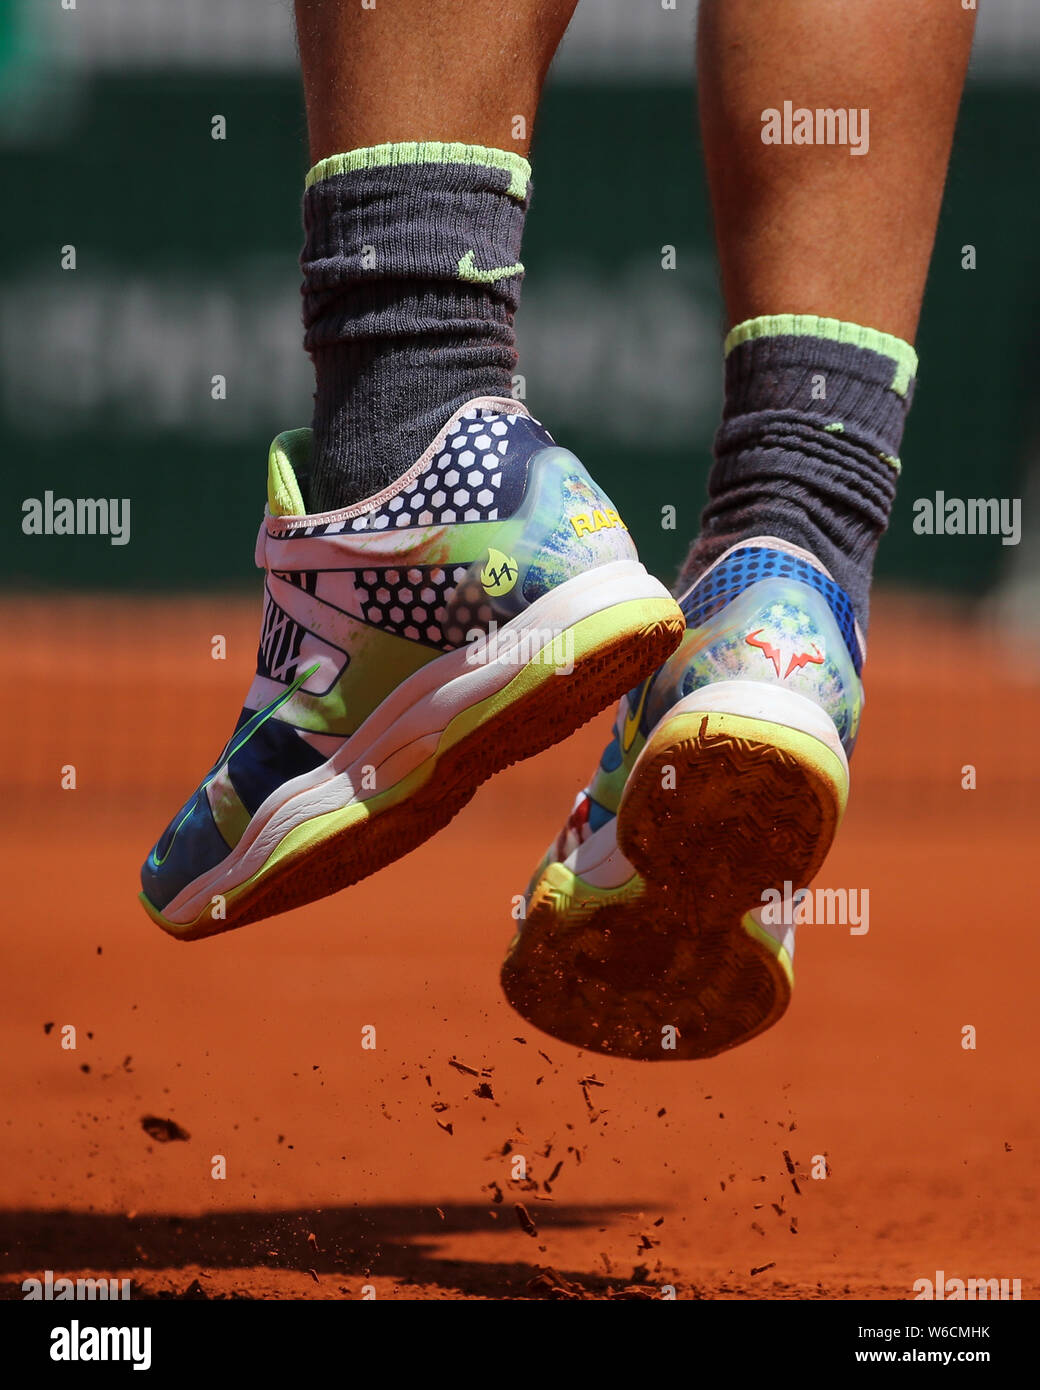 Feet of Spanish tennis player Rafael Nadal jumping during men's singles  match in French Open 2019 tennis tournament Stock Photo - Alamy